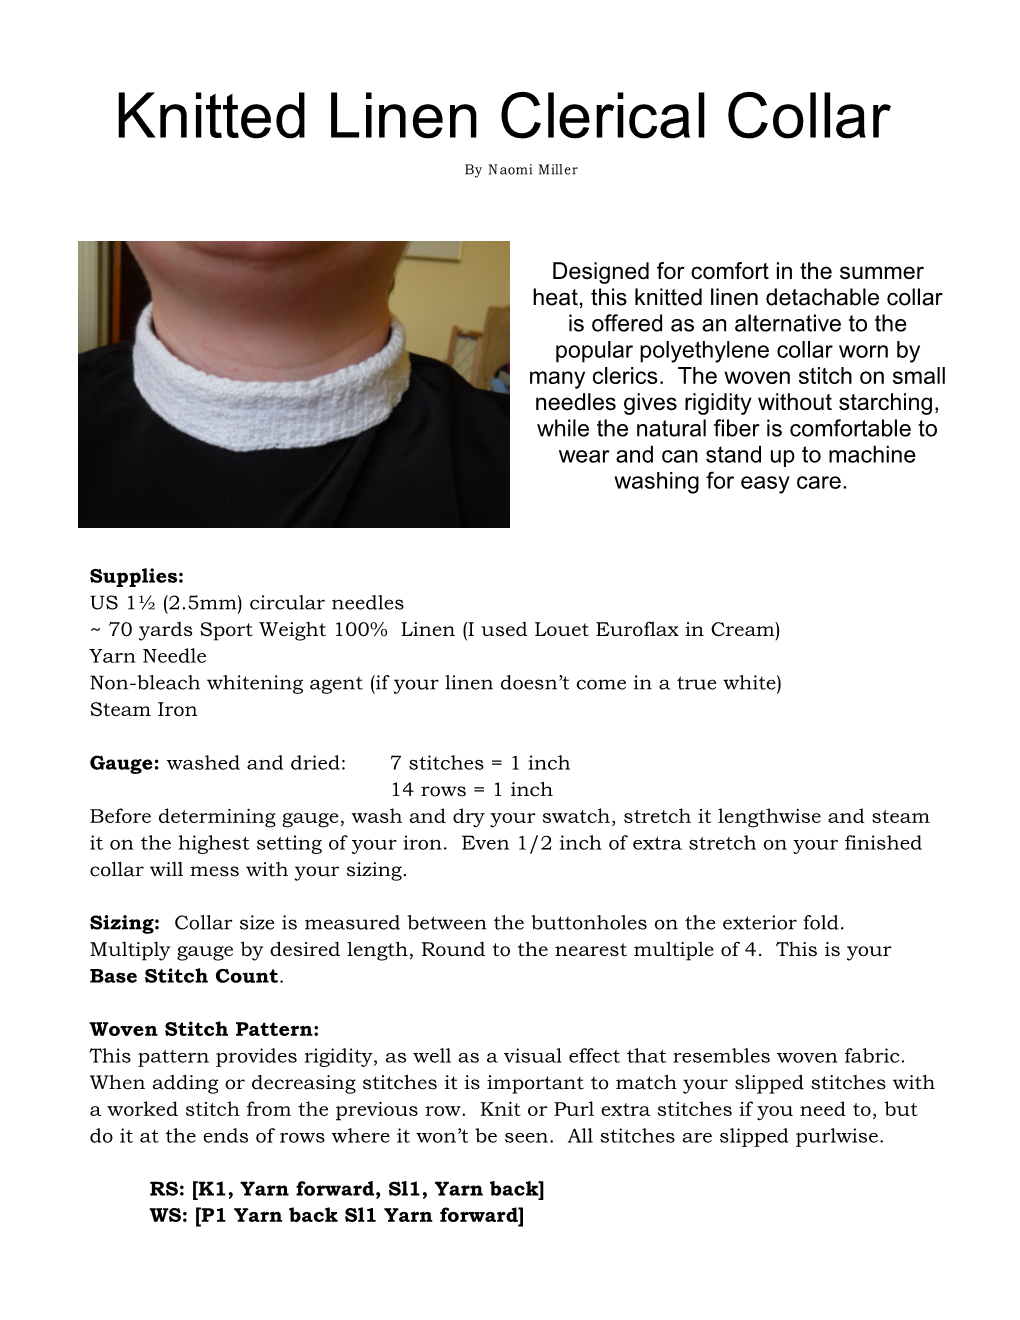 Knitted Linen Clerical Collar by Naomi Miller